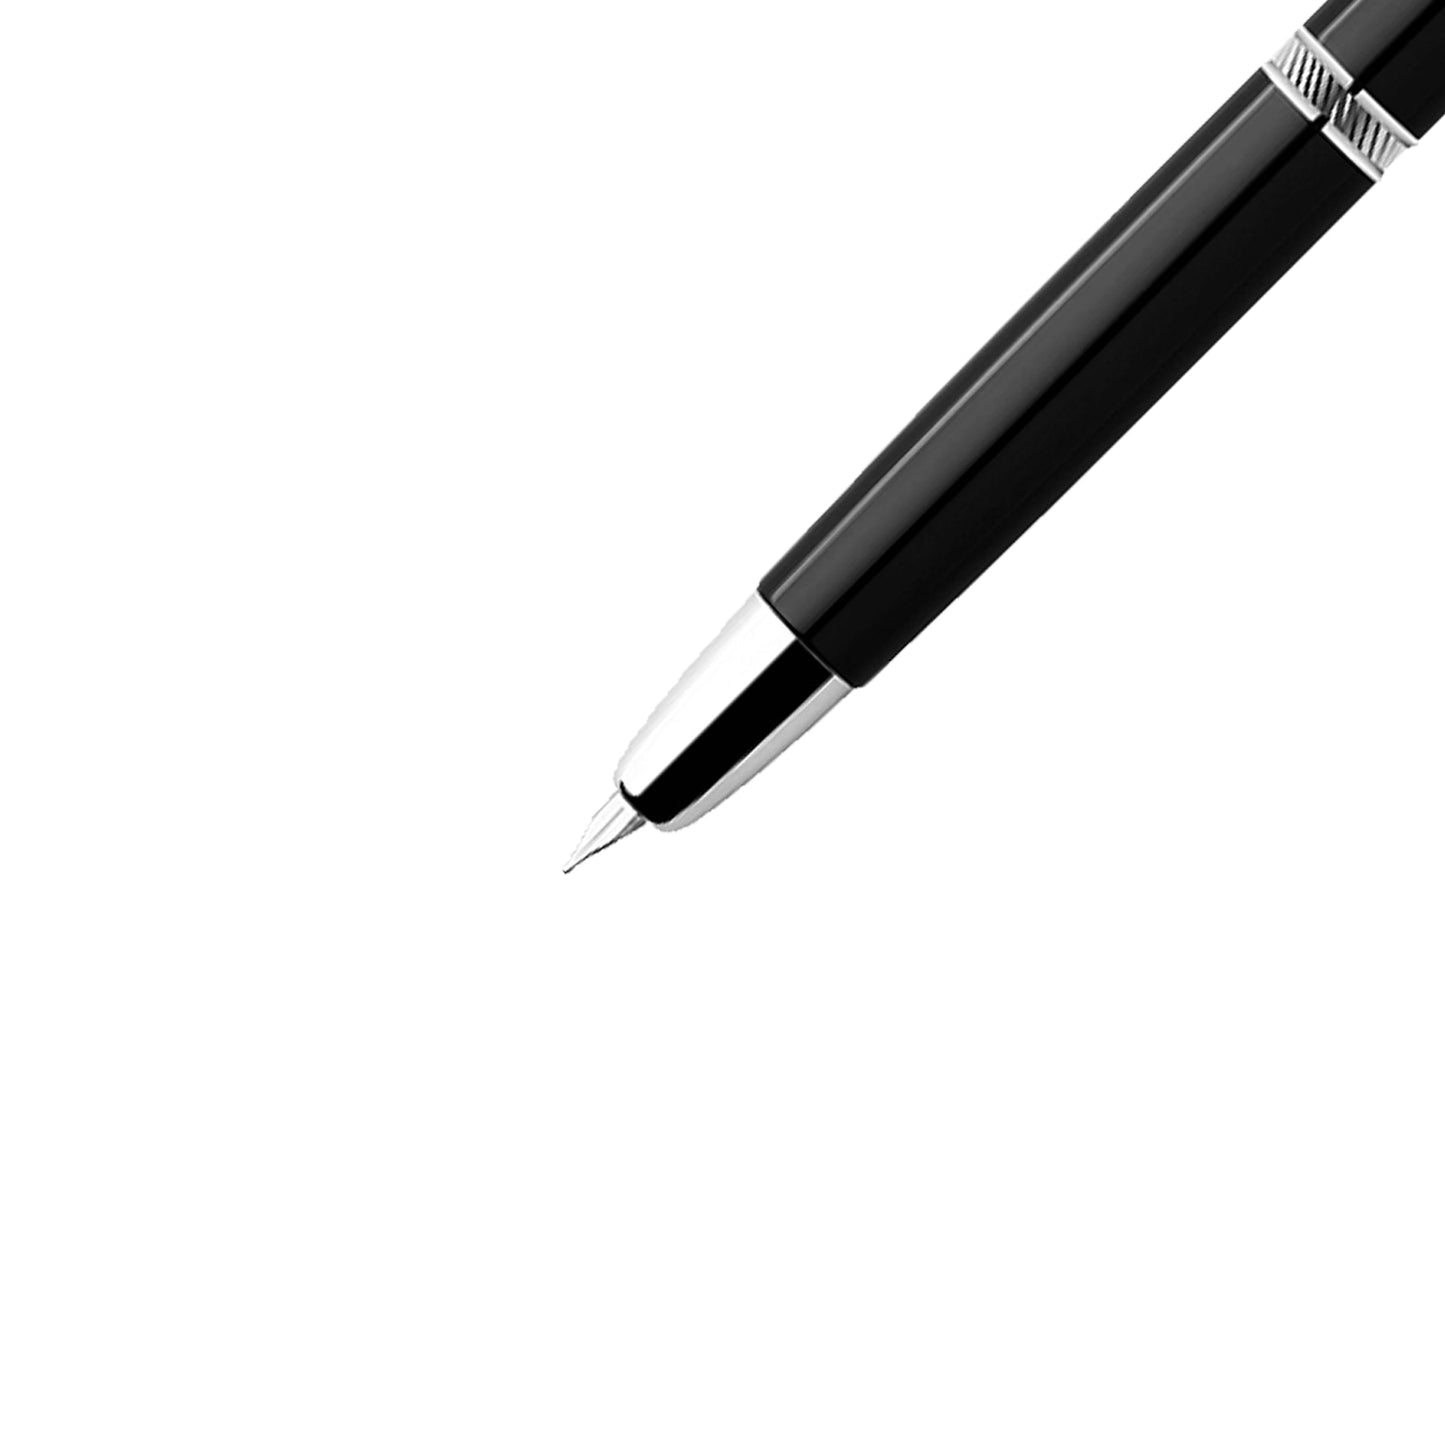 MAJOHN A1 Press Fountain Pen Retractable Extra Fine Nib 0.4mm Metal Matte Black Ink Pen with Converter for Writing